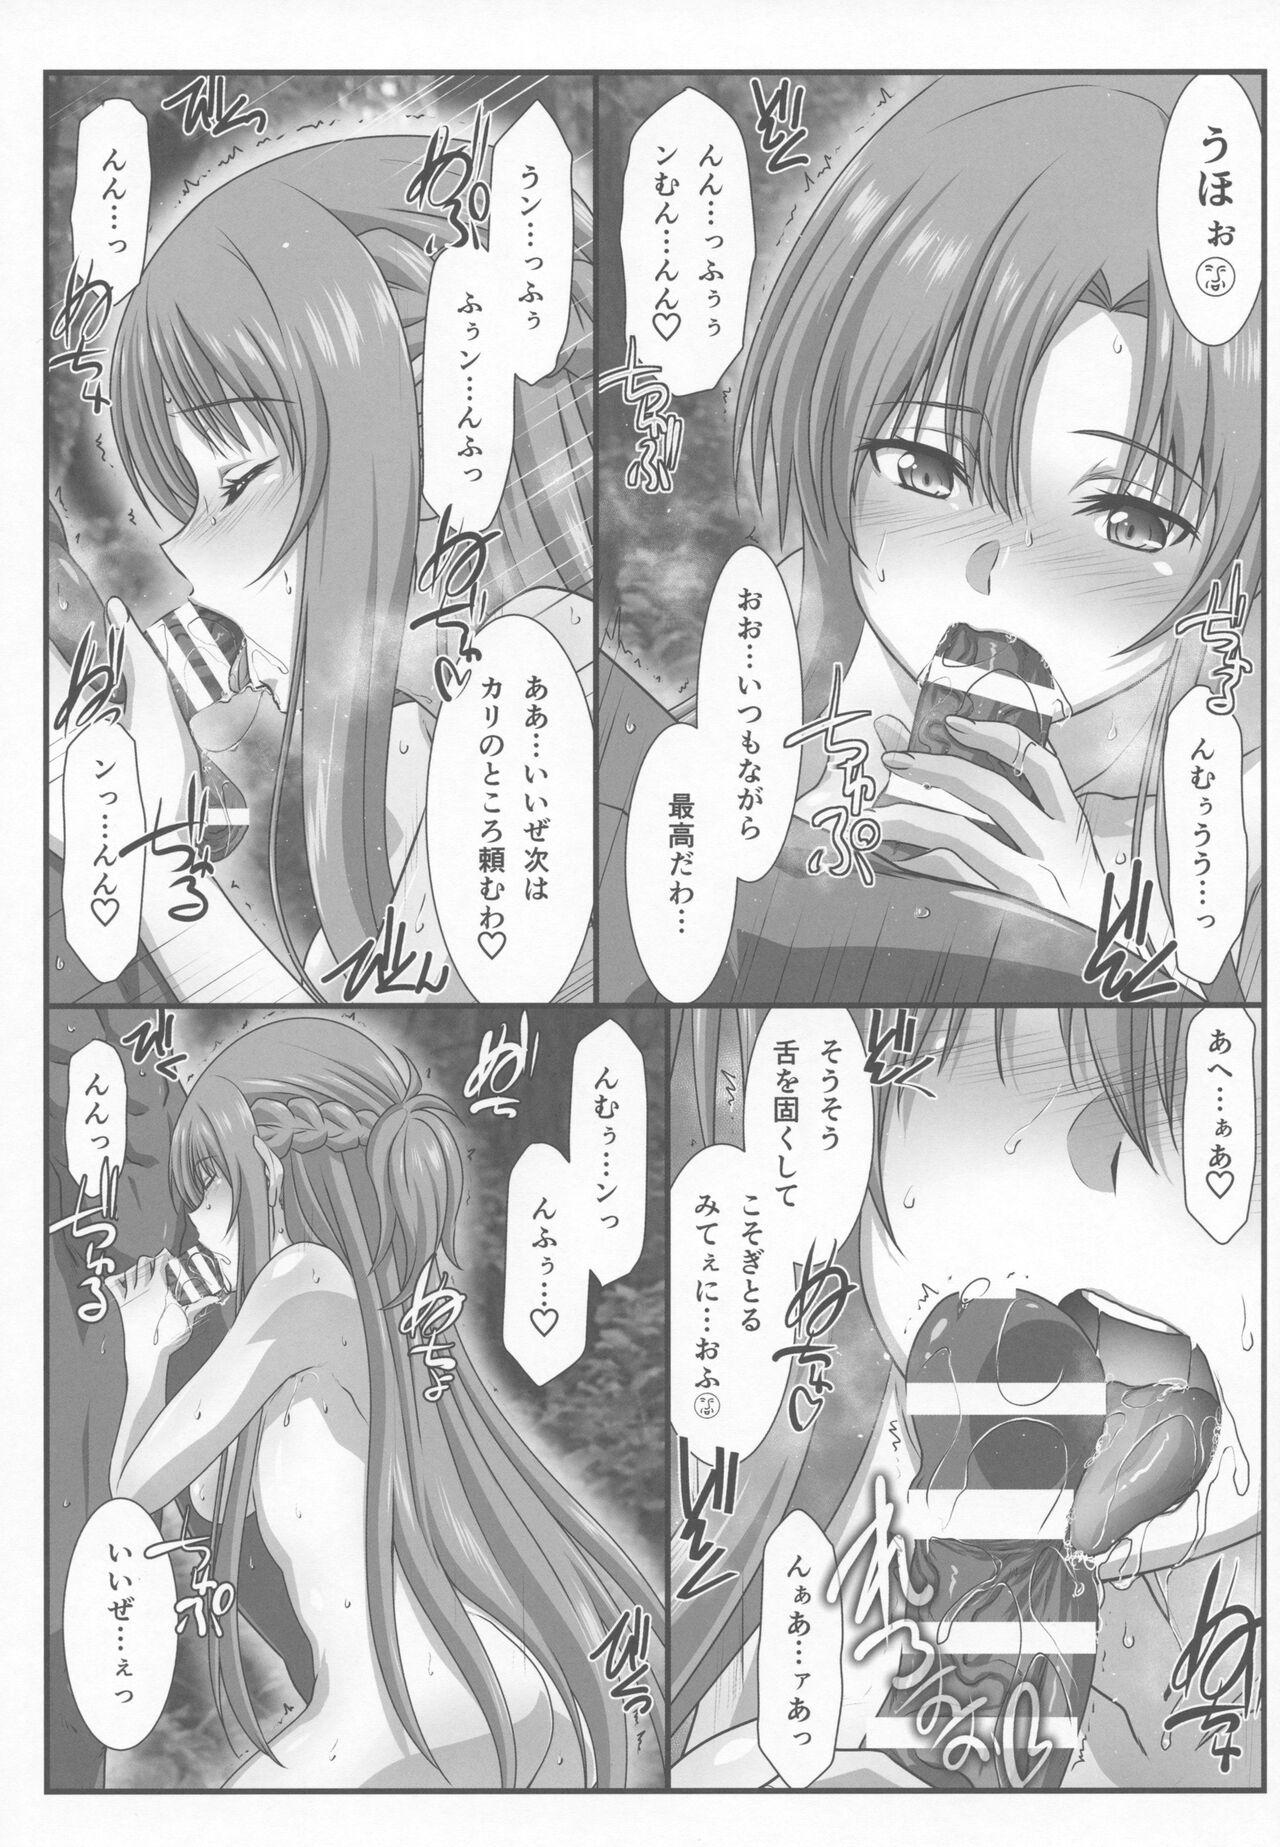 Gayporn Astral Bout Ver. 45 - Sword art online Class - Page 6